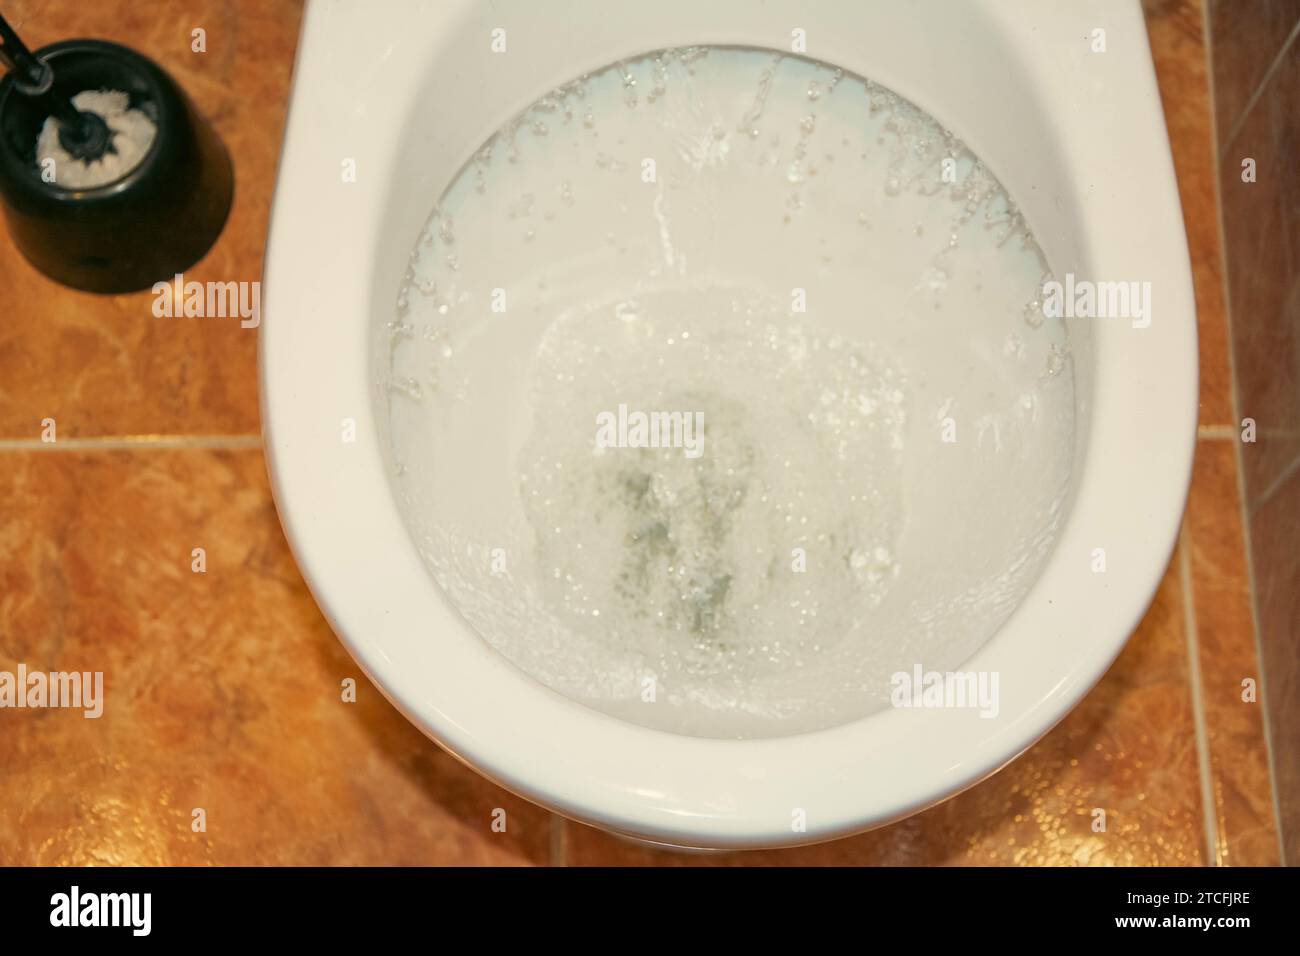 A person's hand flushing the toilet to depict a clean and hygienic practice for proper sanitation. Flushing is essential for maintaining cleanliness a Stock Photo